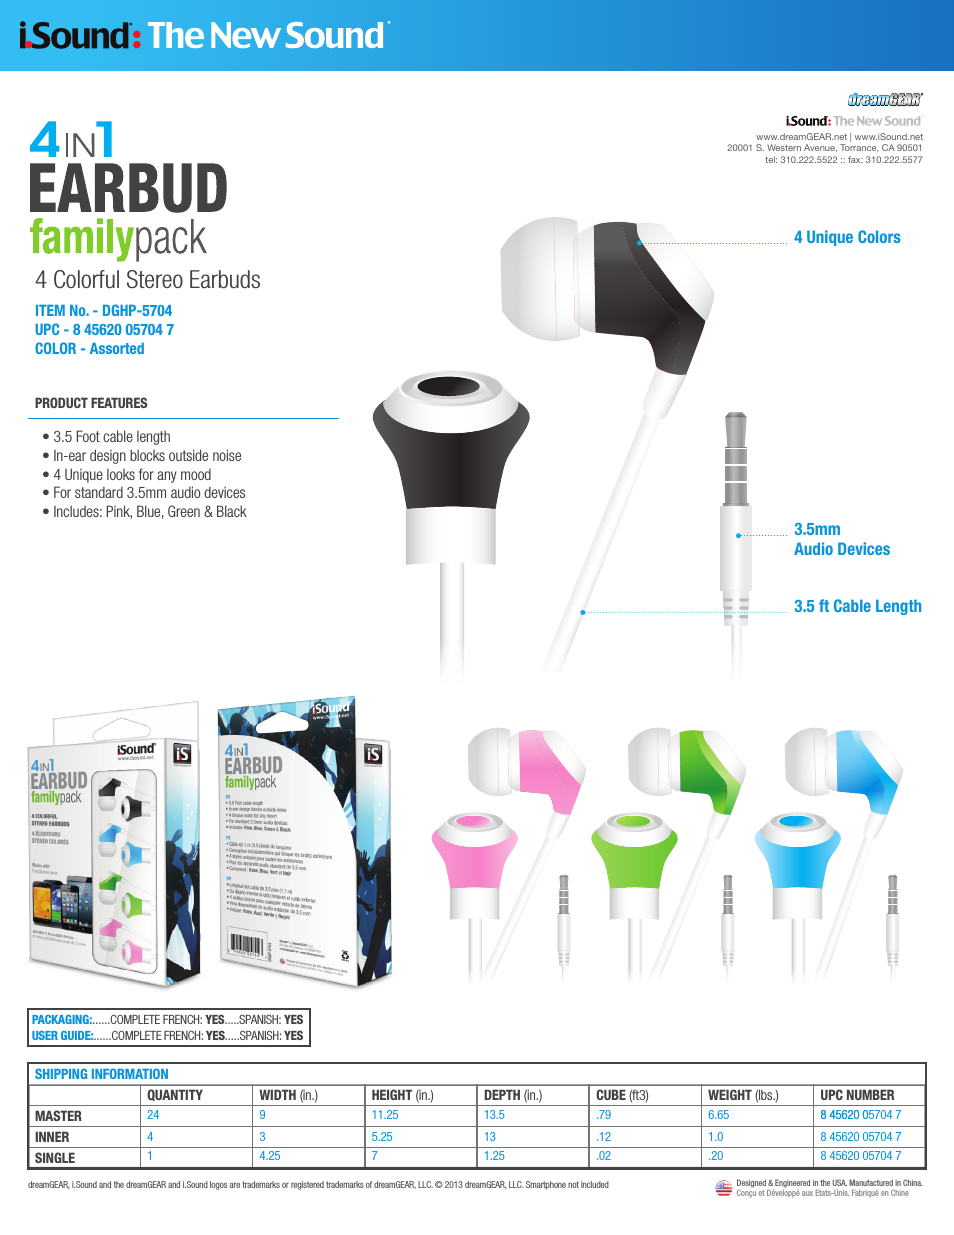 4 in 1 Earbud Family Pack - Sell Sheet